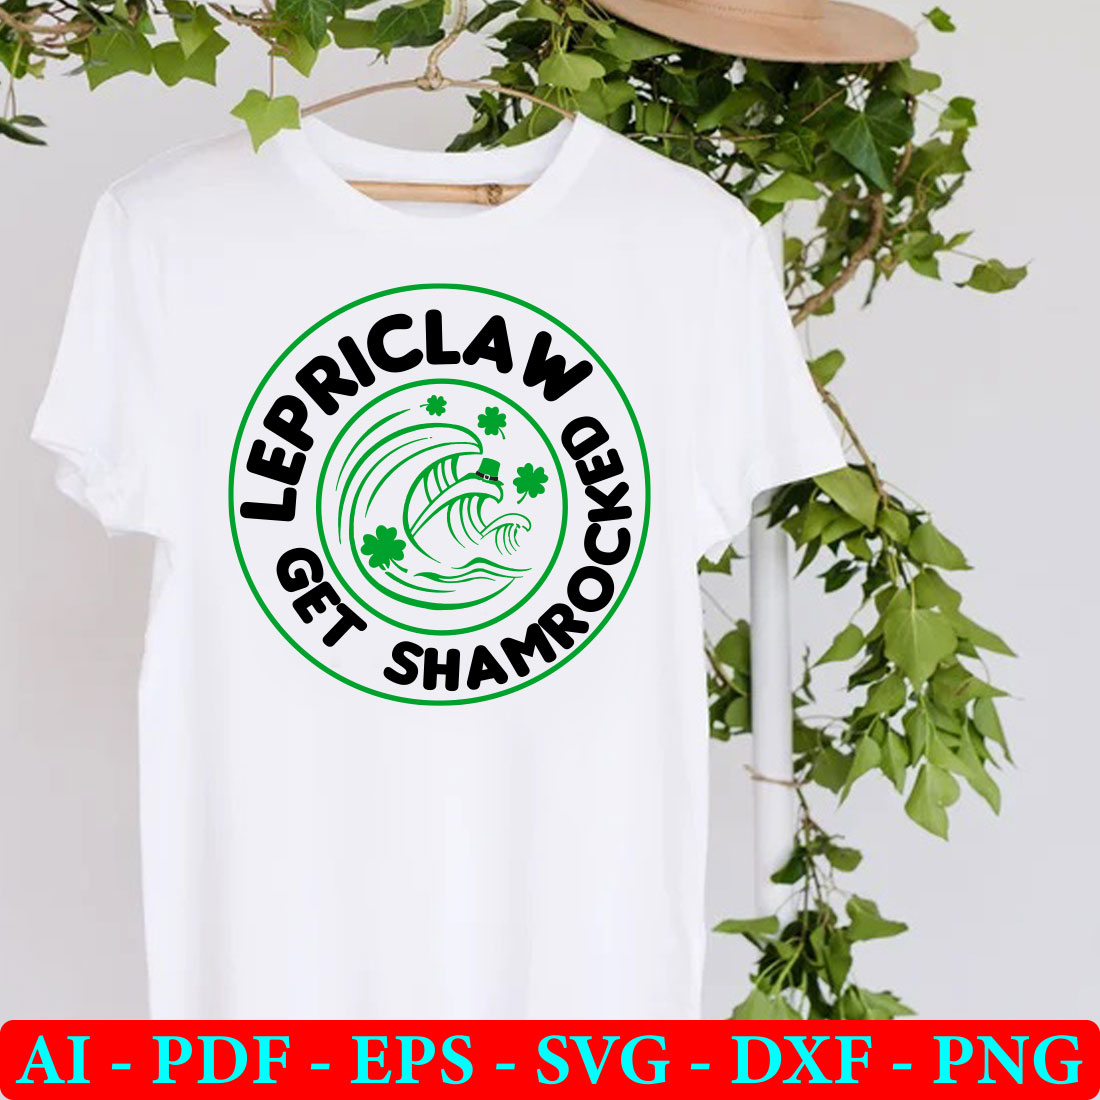 White t - shirt with a green logo on it.